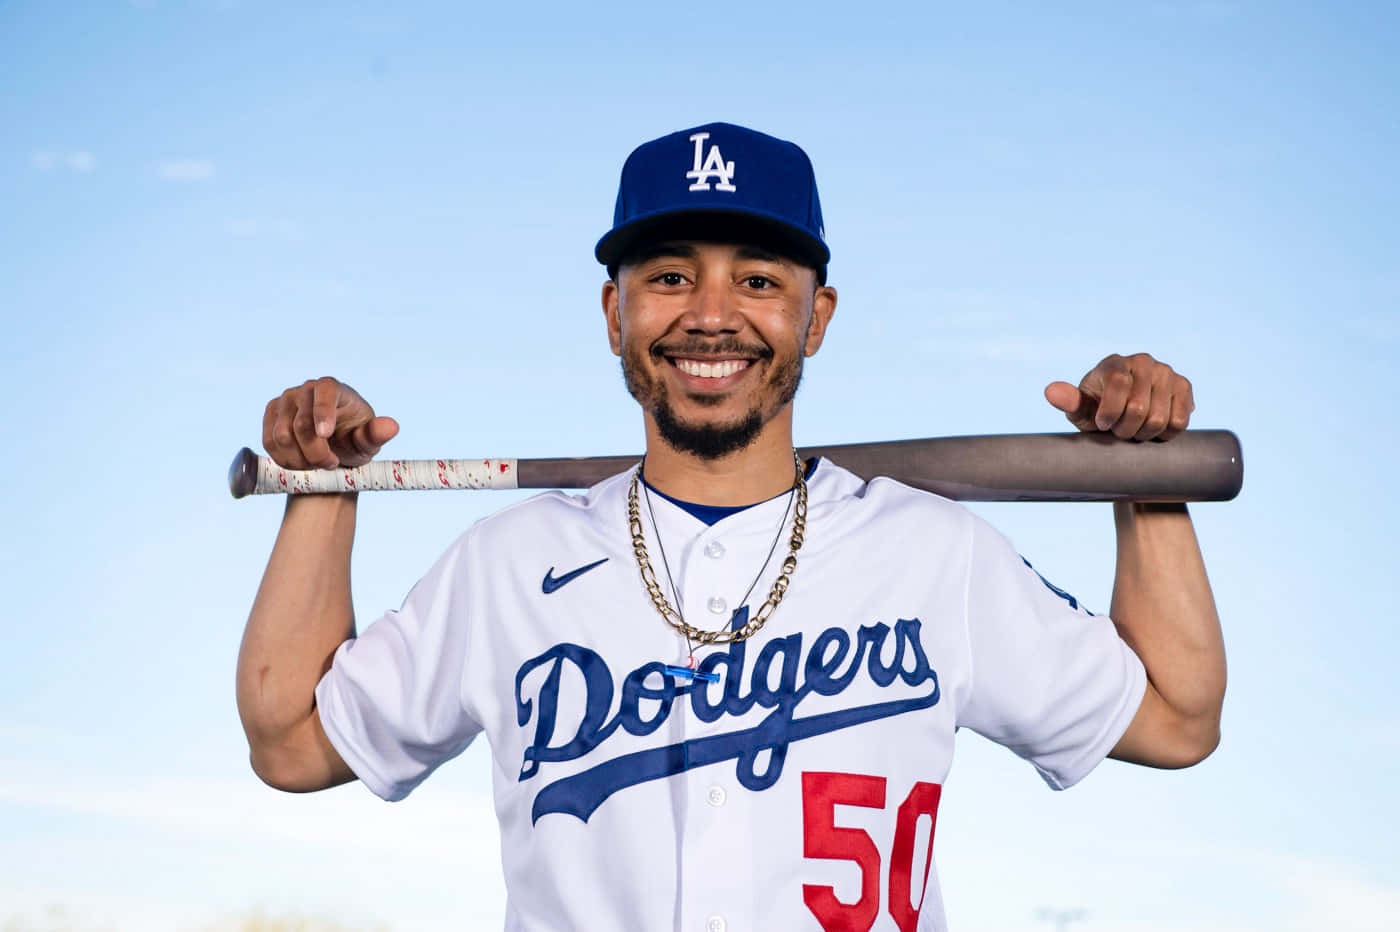 Smiling Dodgers Player With Bat Wallpaper